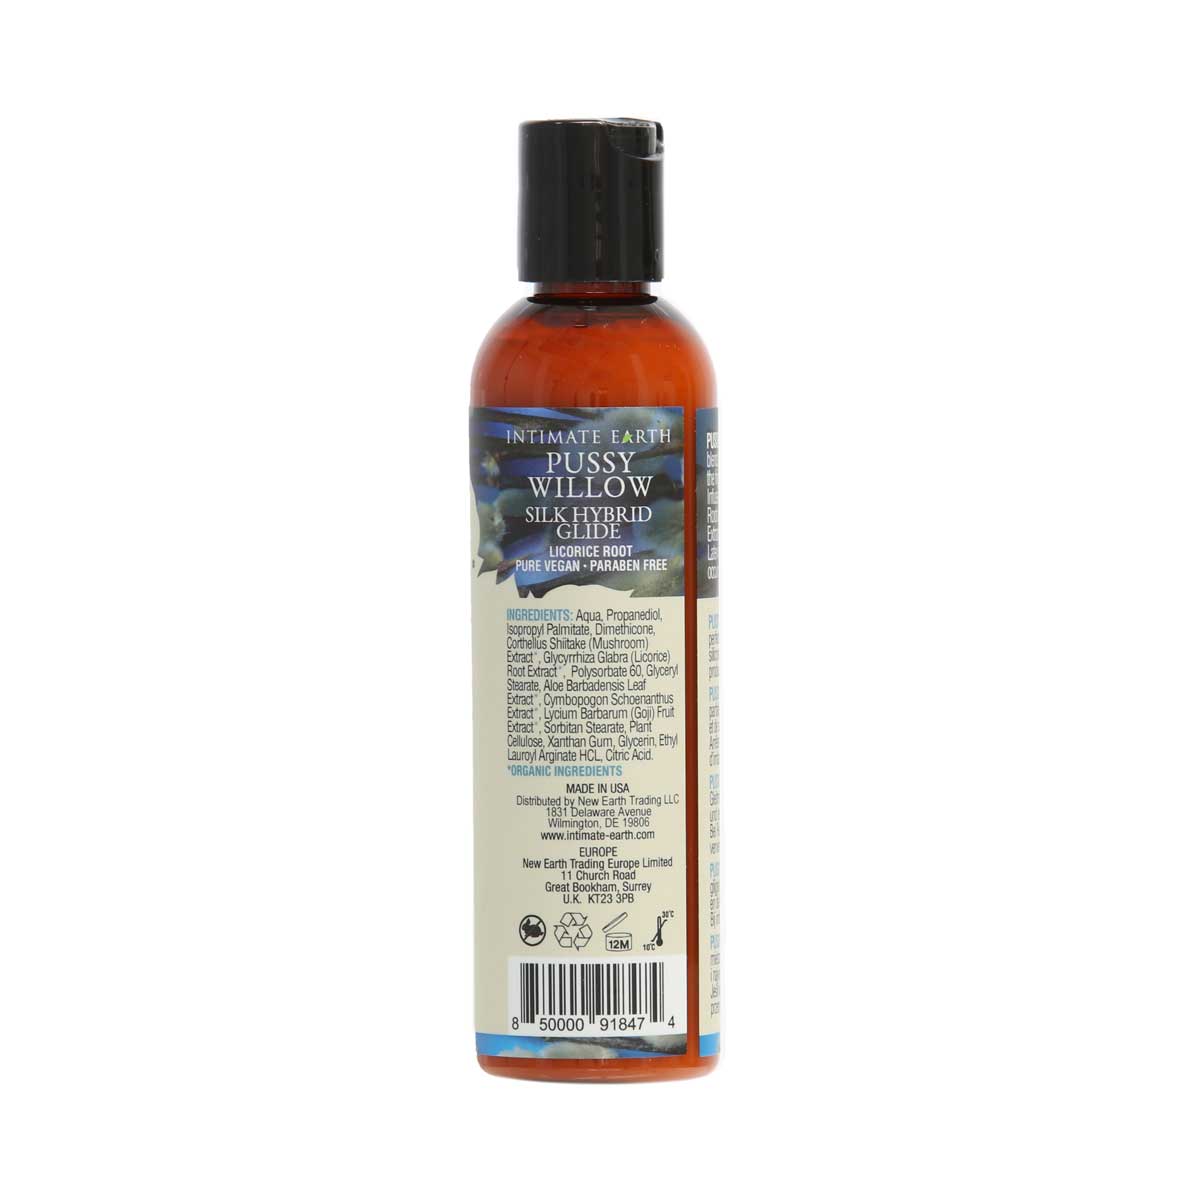 Intimate Earth - Pussy Willow Silk Hybrid Glide - 4 oz